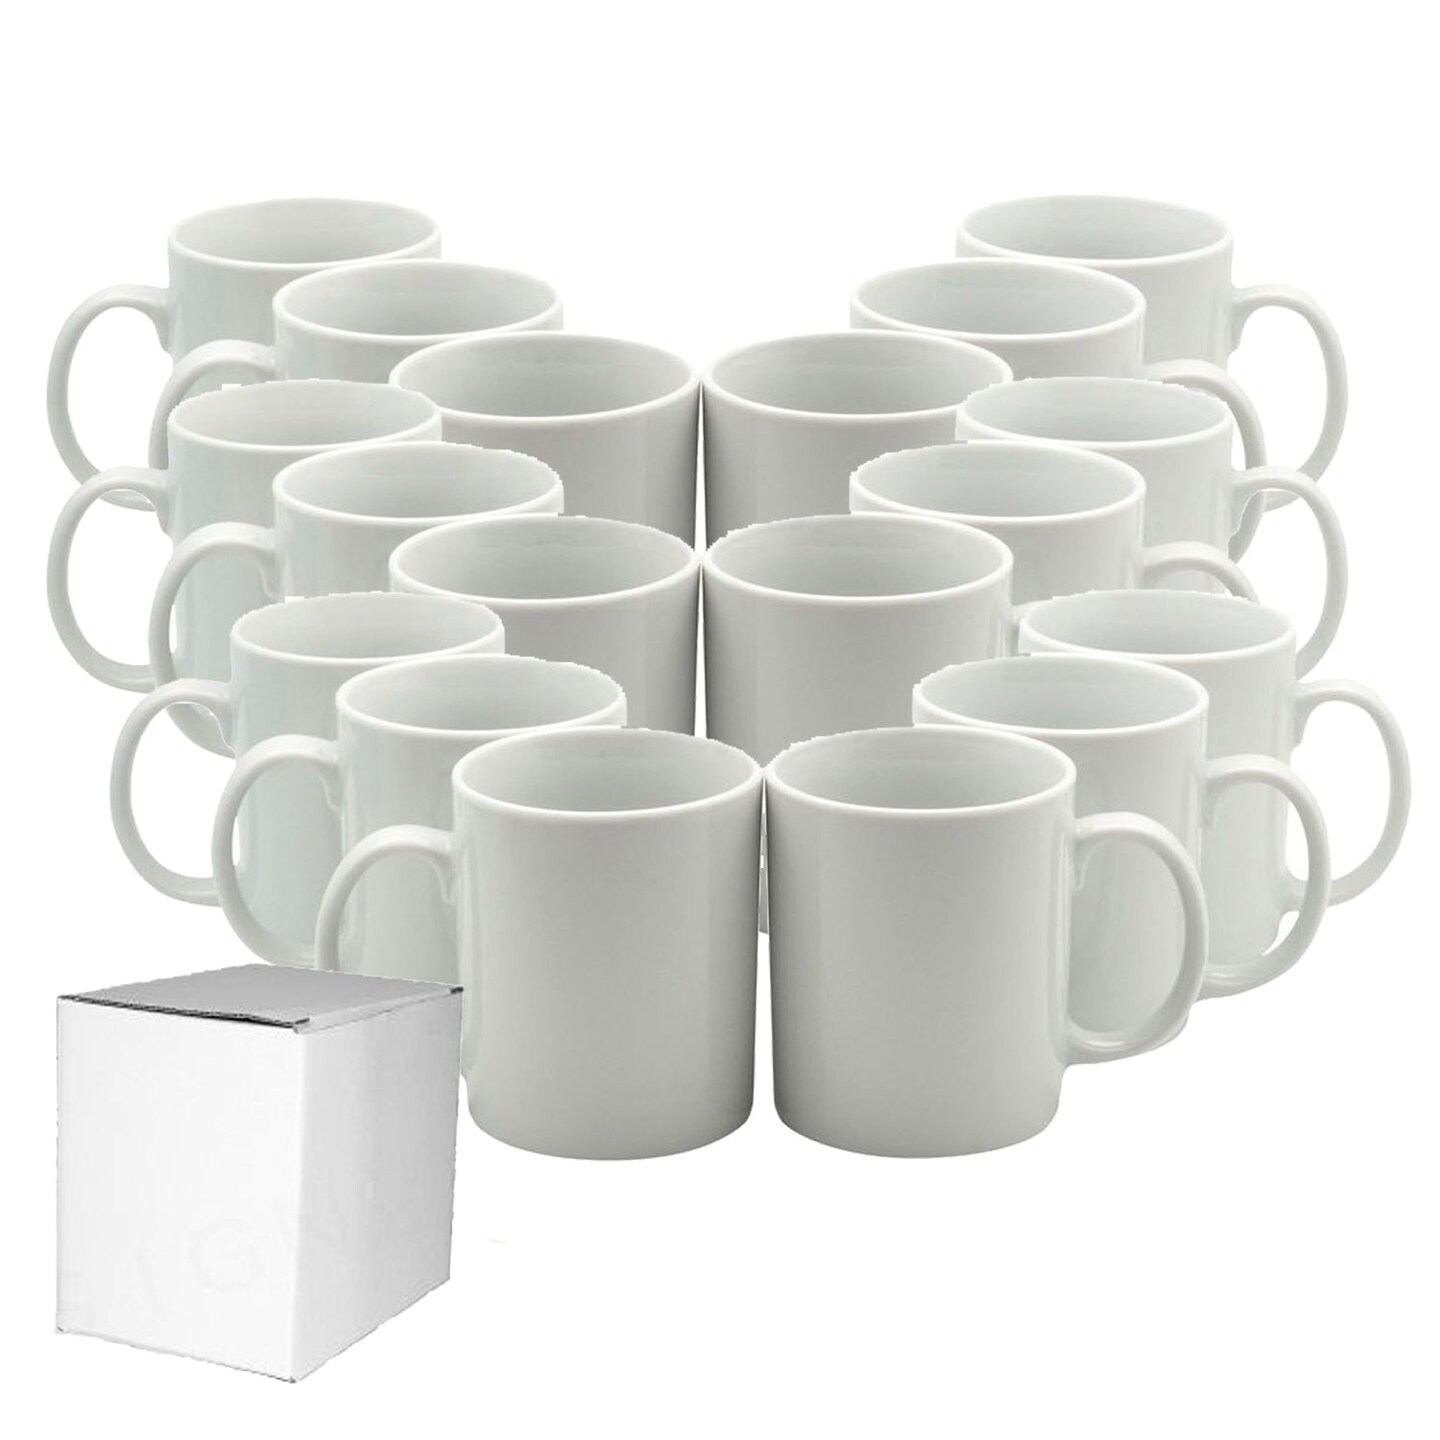 11 Oz Ceramic Sublimation Sublimation Coffee Mugs White Porcelain Blank  Blanks For Tea, Milk Latte, Hot Cocoa B1129 From Bestoffers, $2.65